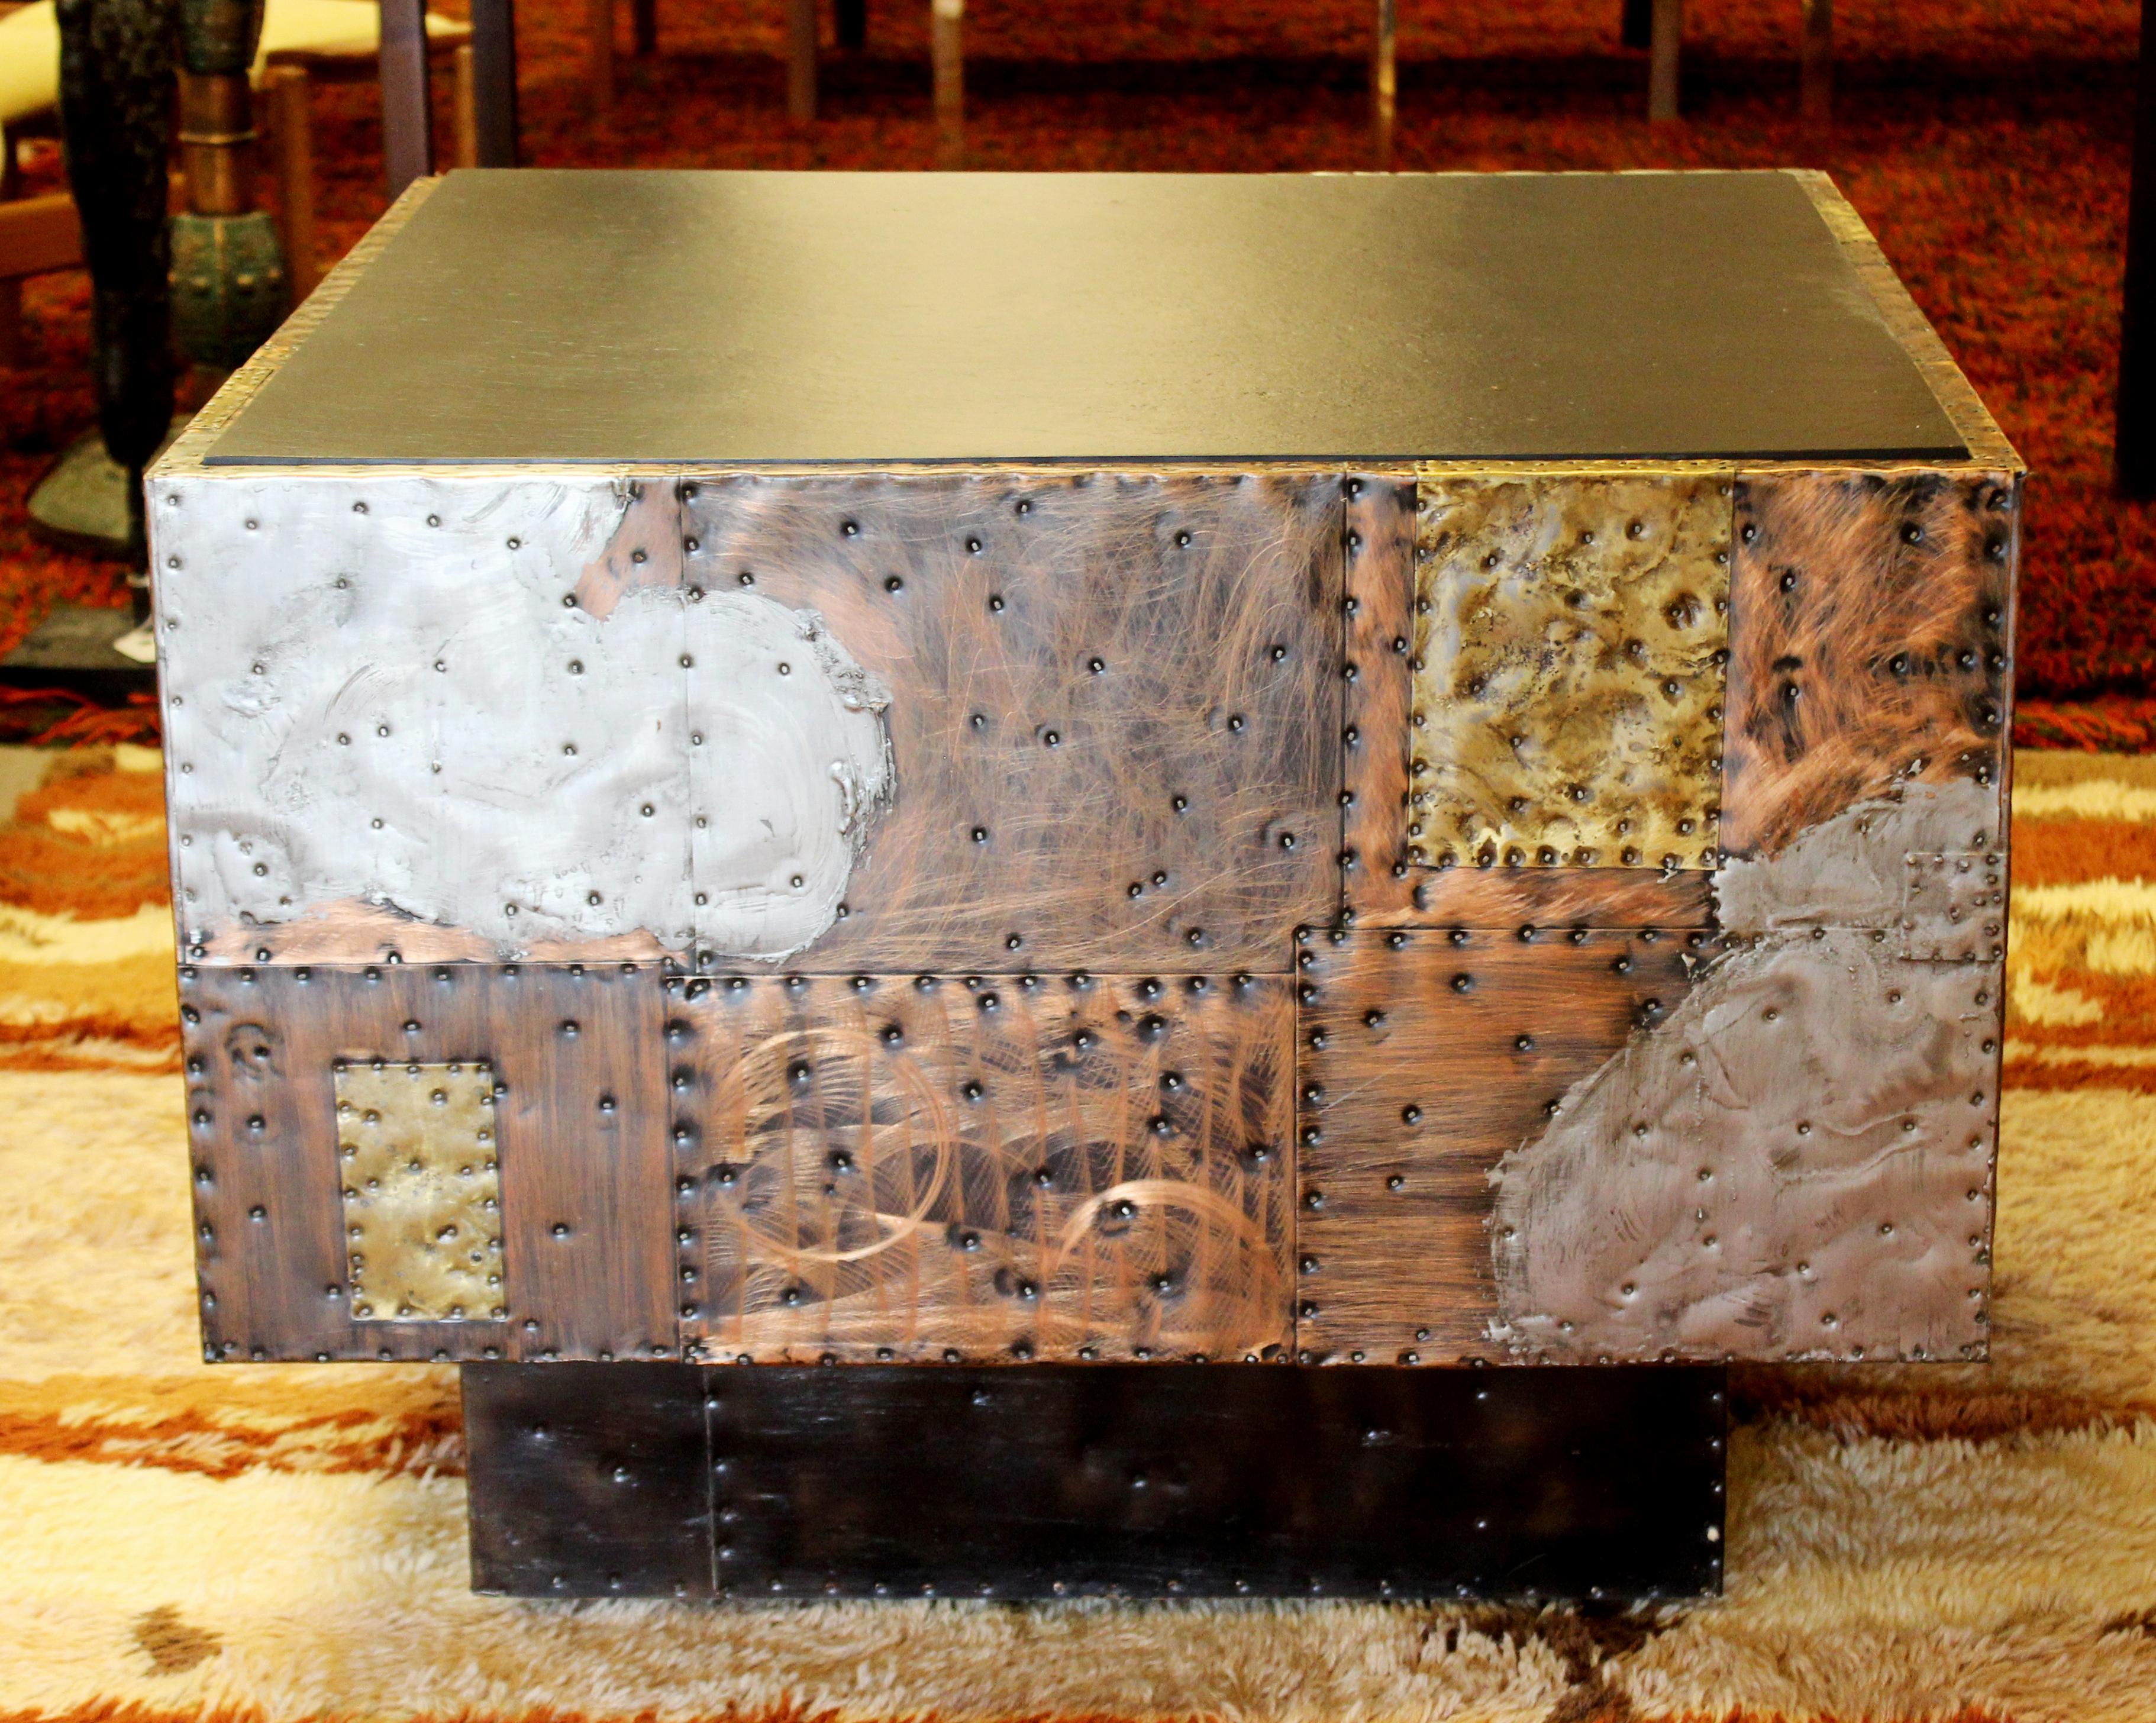 American Mid-Century Modern Paul Evans Cube Coffee Table Slate Top Copper Patchwork 1970s